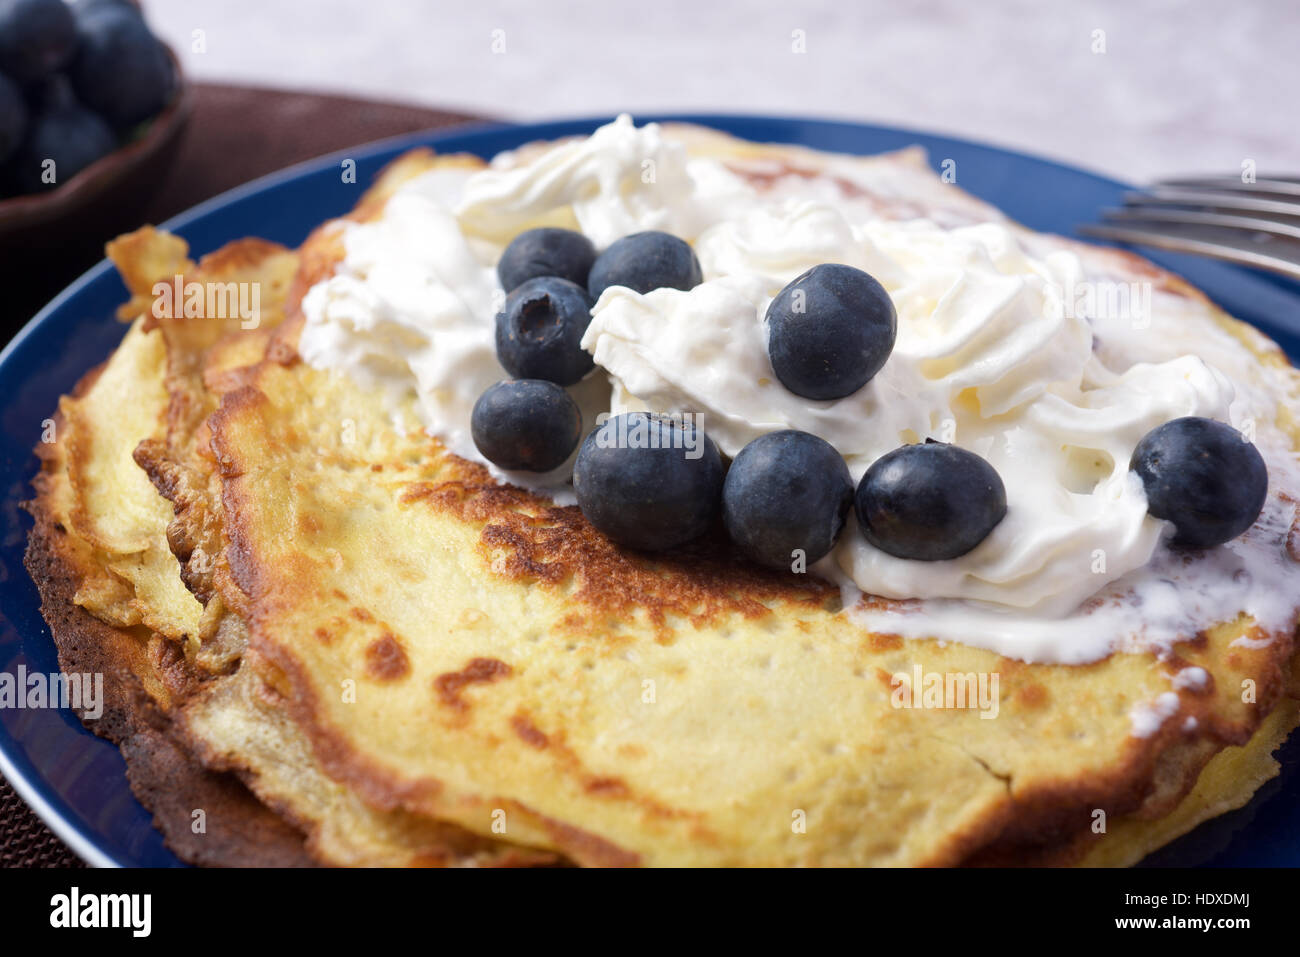 Delicious pancake breakfast with blueberries Stock Photo